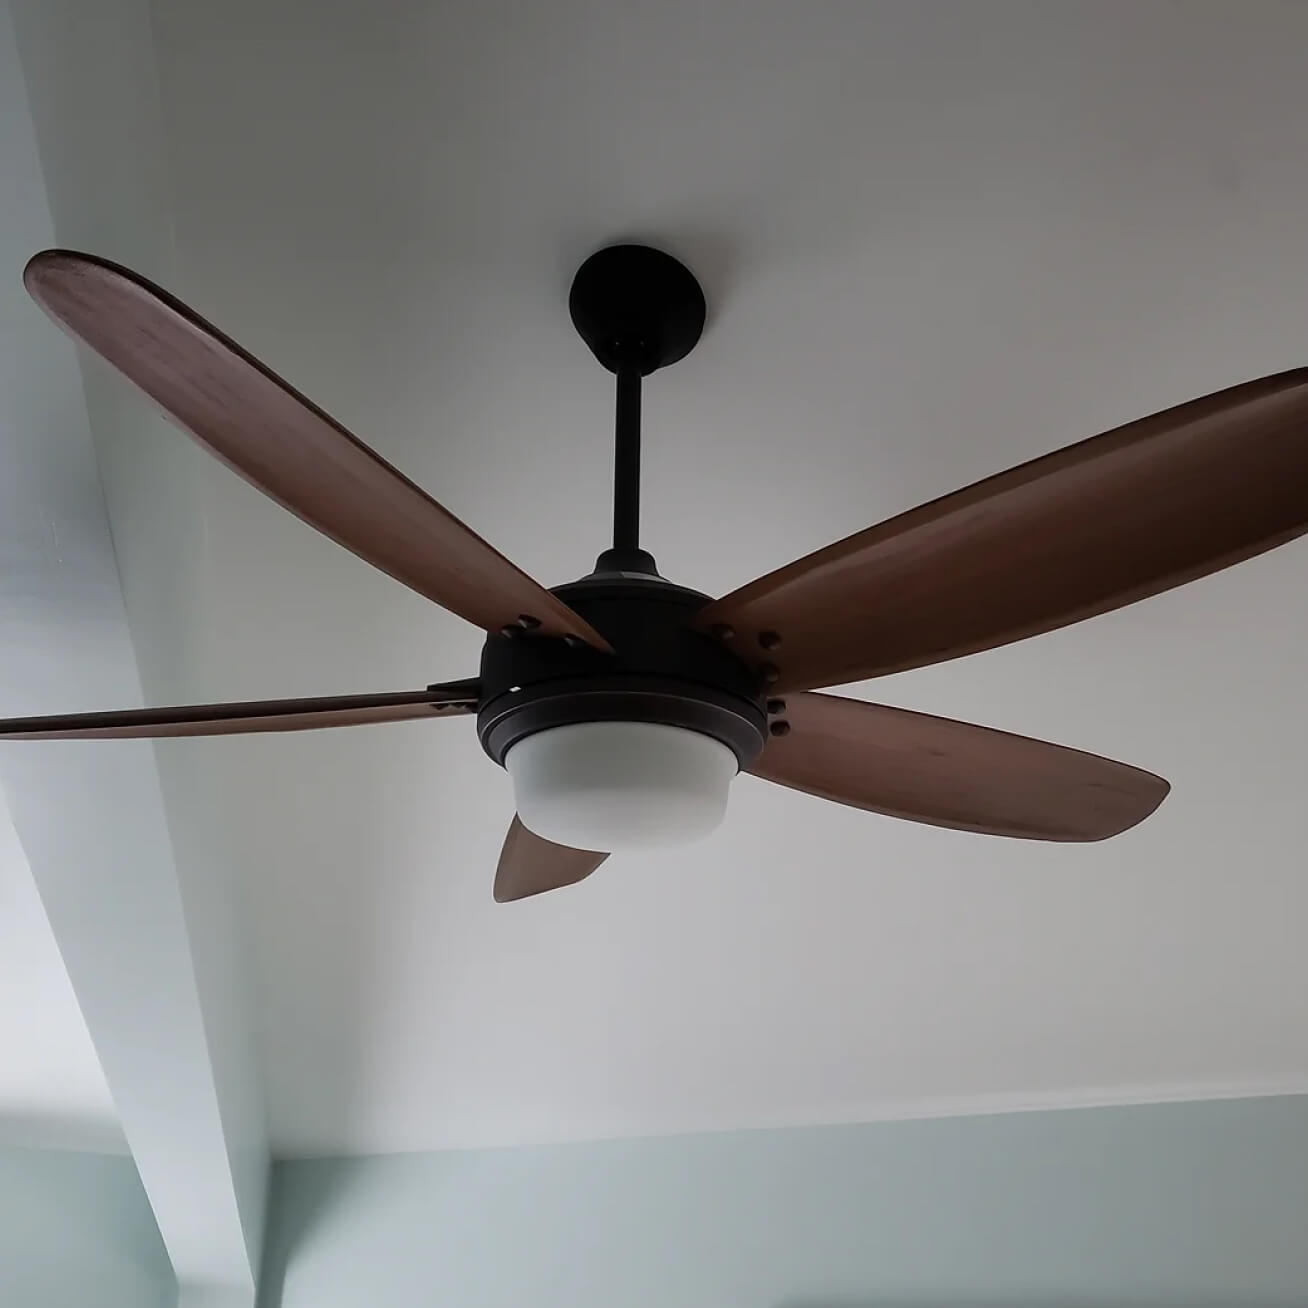 Featured image for “Ceiling Fan/Light Fixture install”